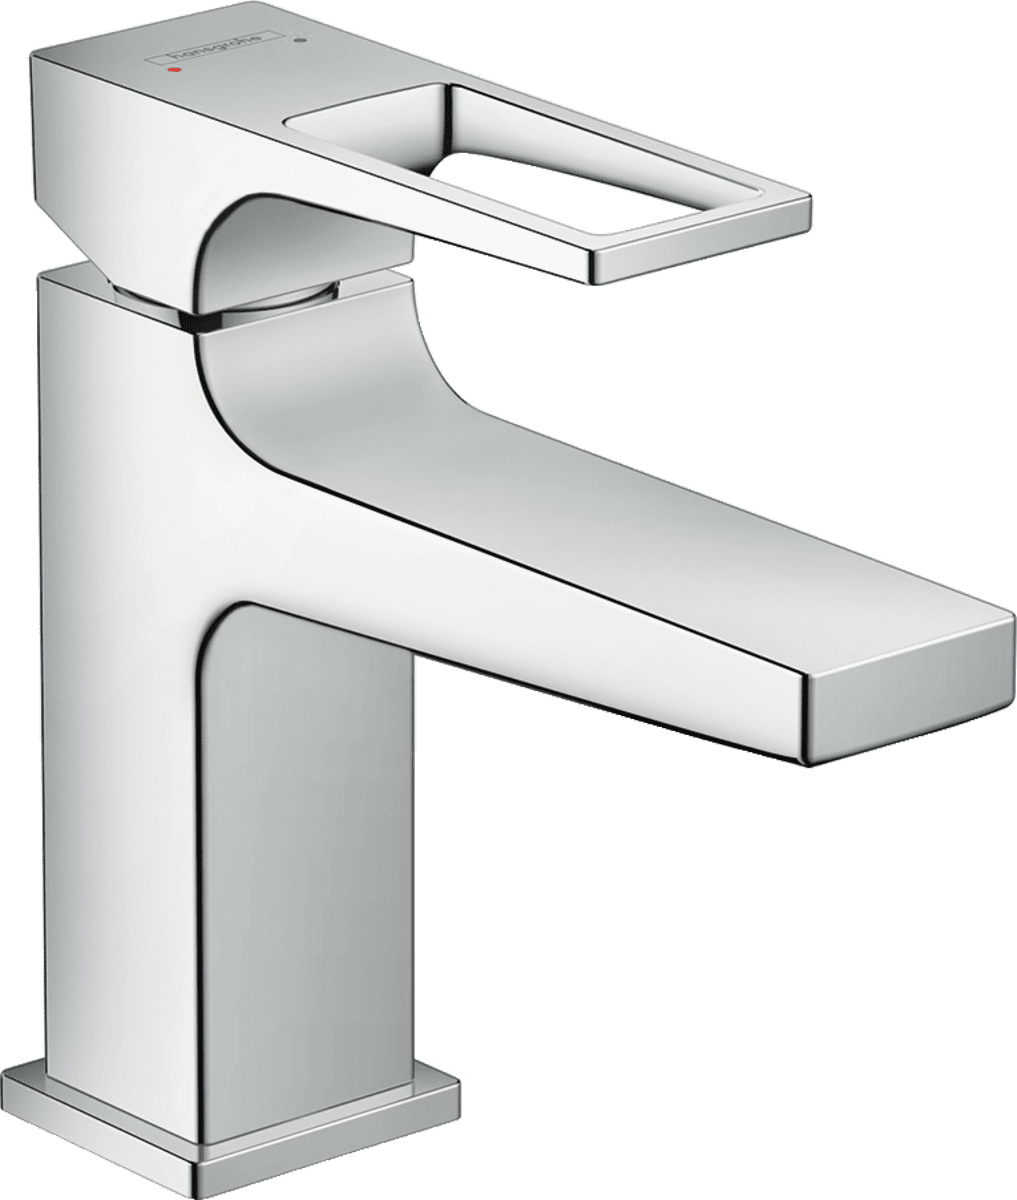 Picture of HANSGROHE Metropol Single lever basin mixer 100 with loop handle for handrinse basins with push-open waste set #74500000 - Chrome